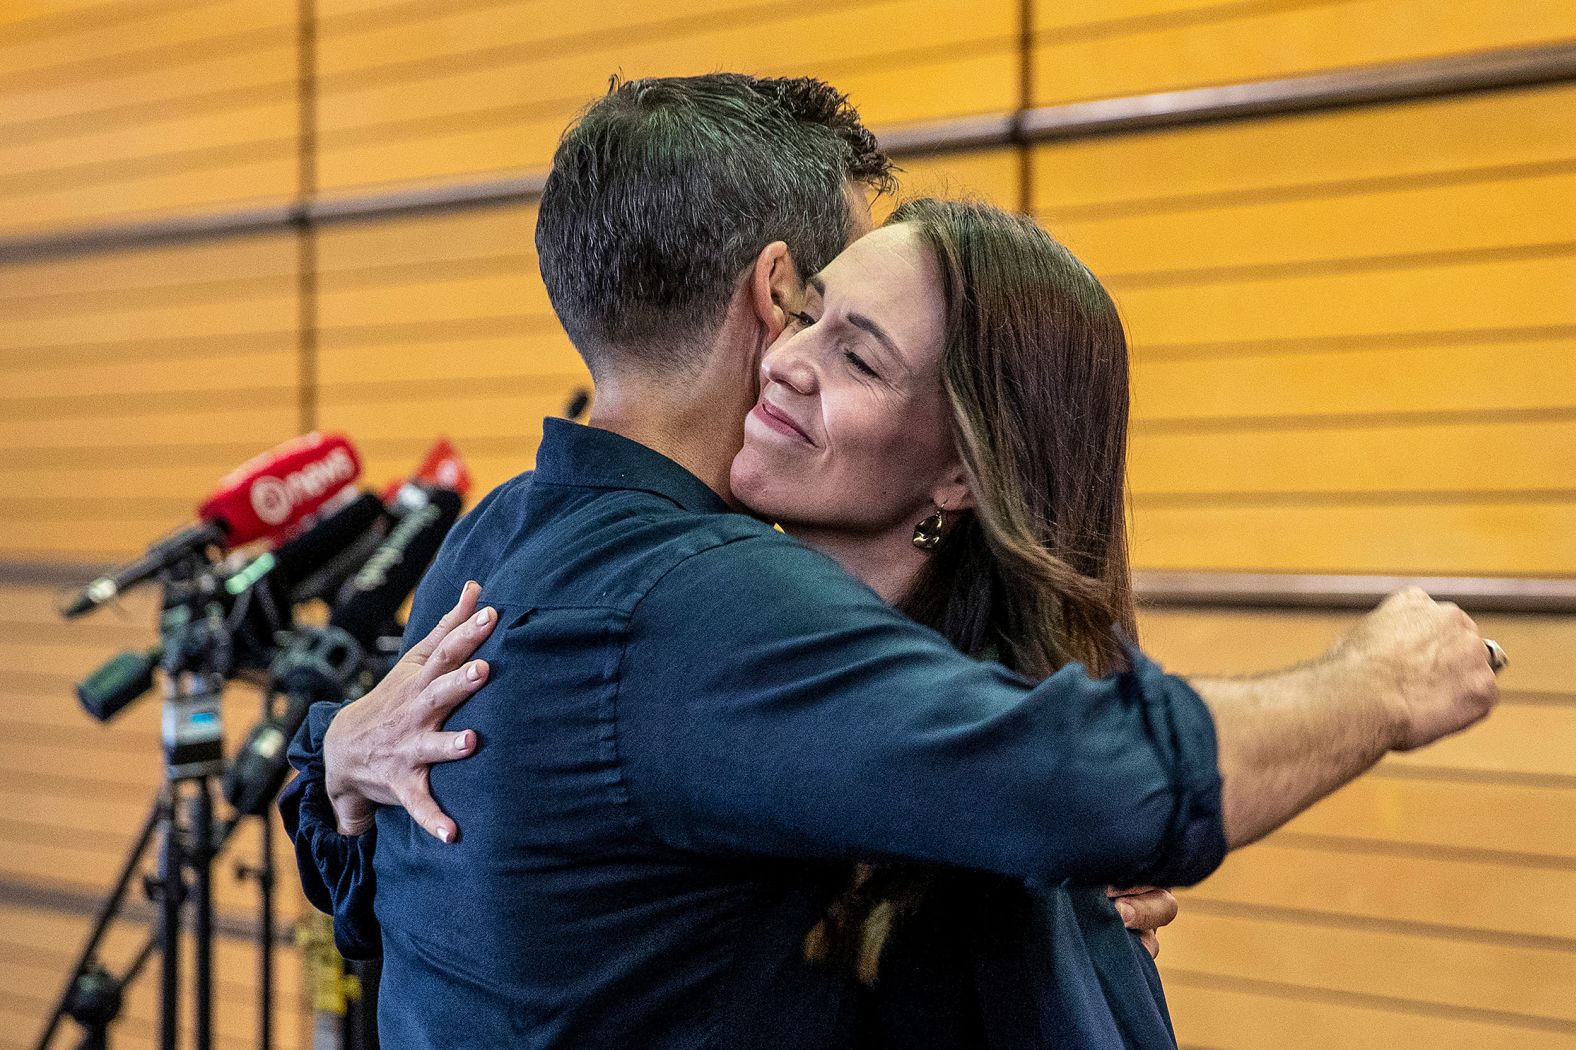 New Zealand Prime Minister Jacinda Ardern hugs her fiancée, Clark Gayford, after <a href="index.php?page=&url=https%3A%2F%2Fwww.cnn.com%2F2023%2F01%2F18%2Fasia%2Fnew-zealand-jacinda-ardern-not-seeking-reelection-intl-hnk%2Findex.html" target="_blank">announcing her resignation</a> at a news conference in Napier, New Zealand, on Thursday, January 19. Ardern told reporters that February 7 will be her last day in office, saying she doesn't believe she has the energy to seek re-election in October.